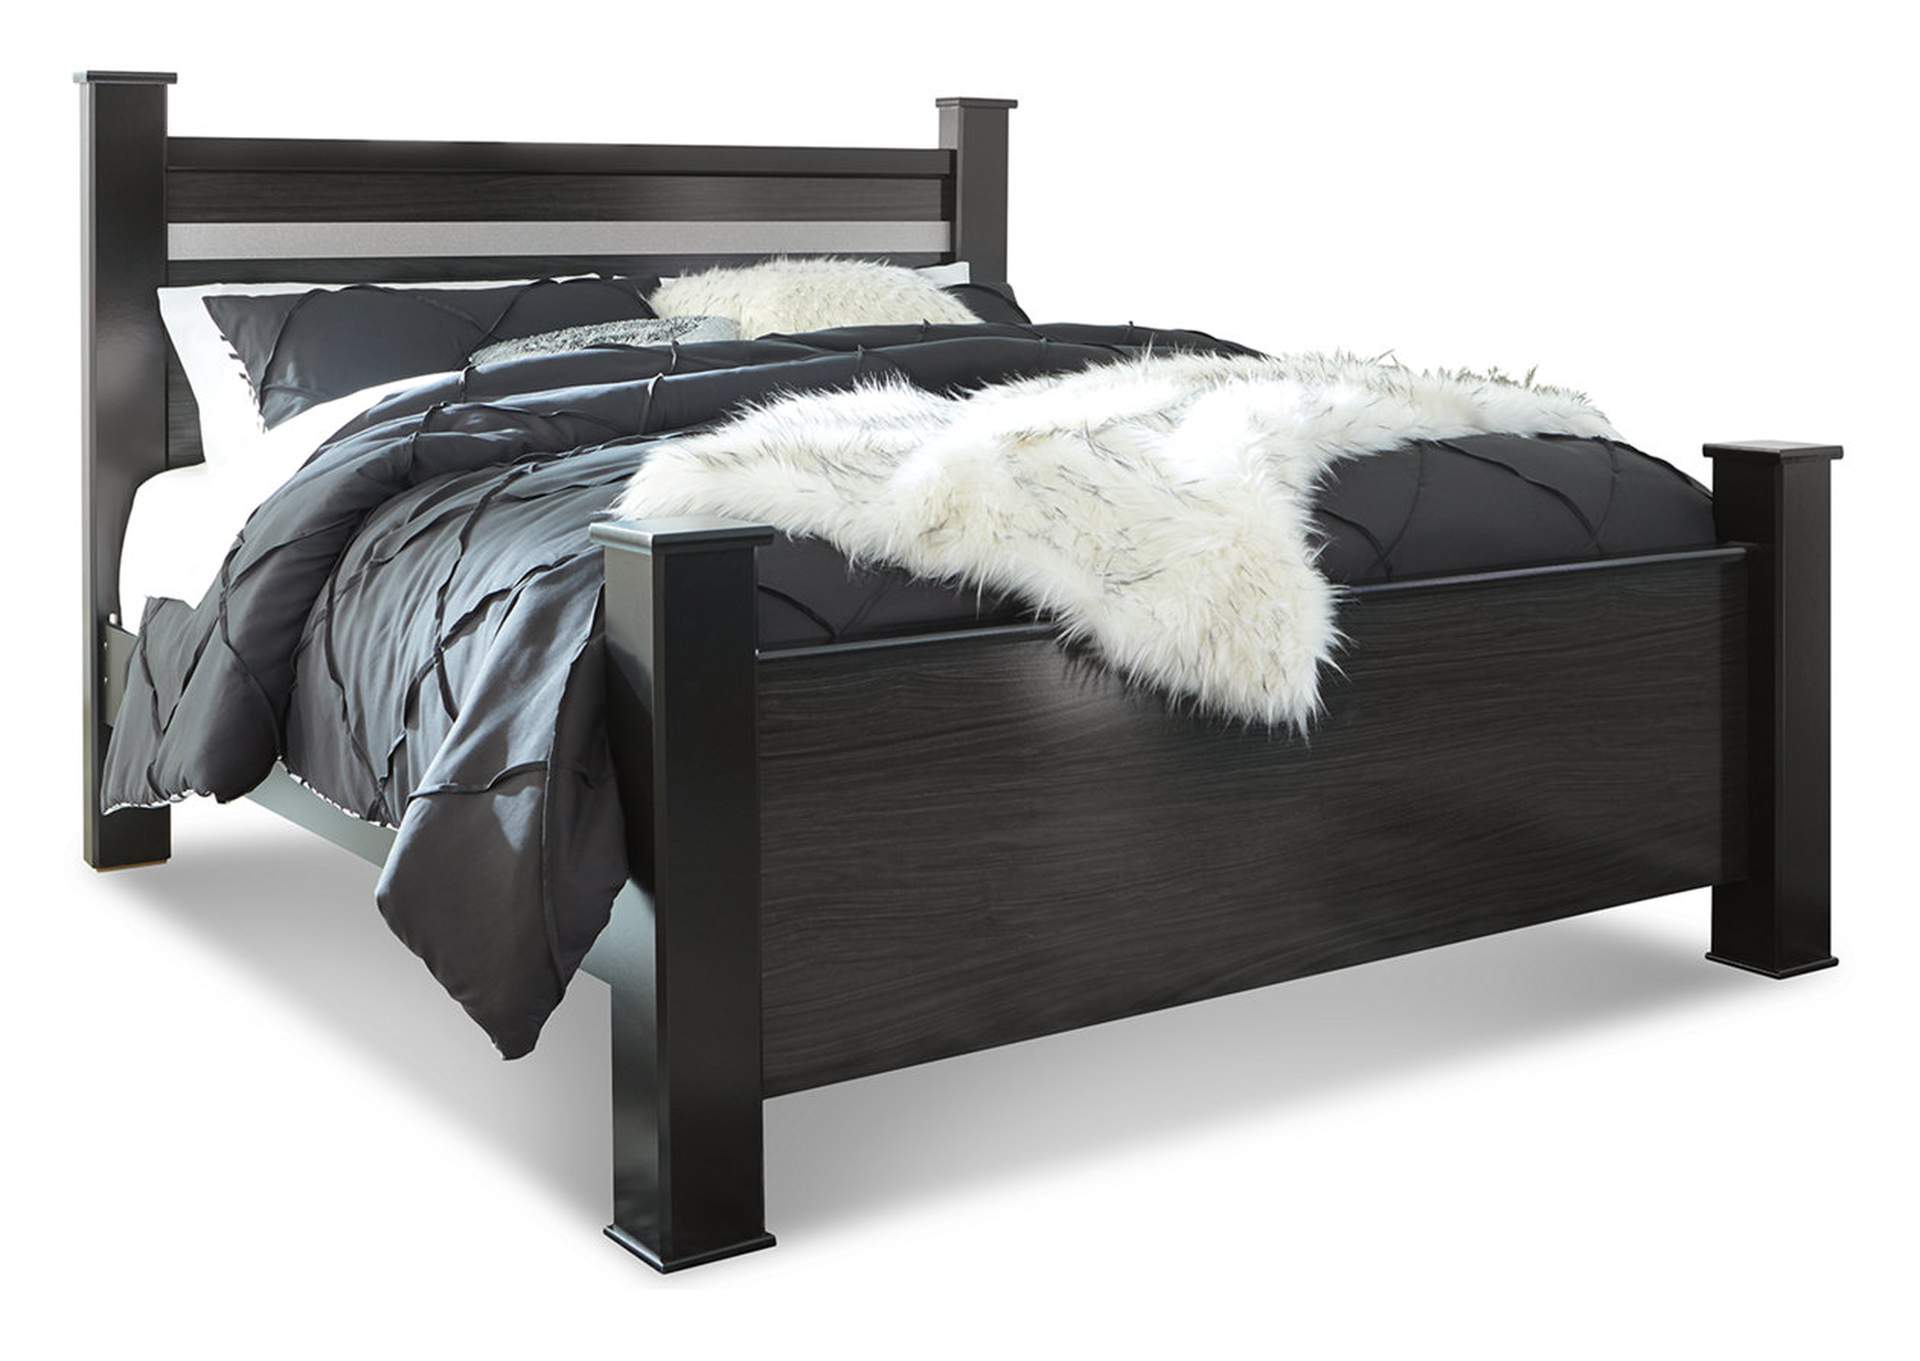 Starberry King Poster Bed,Signature Design By Ashley